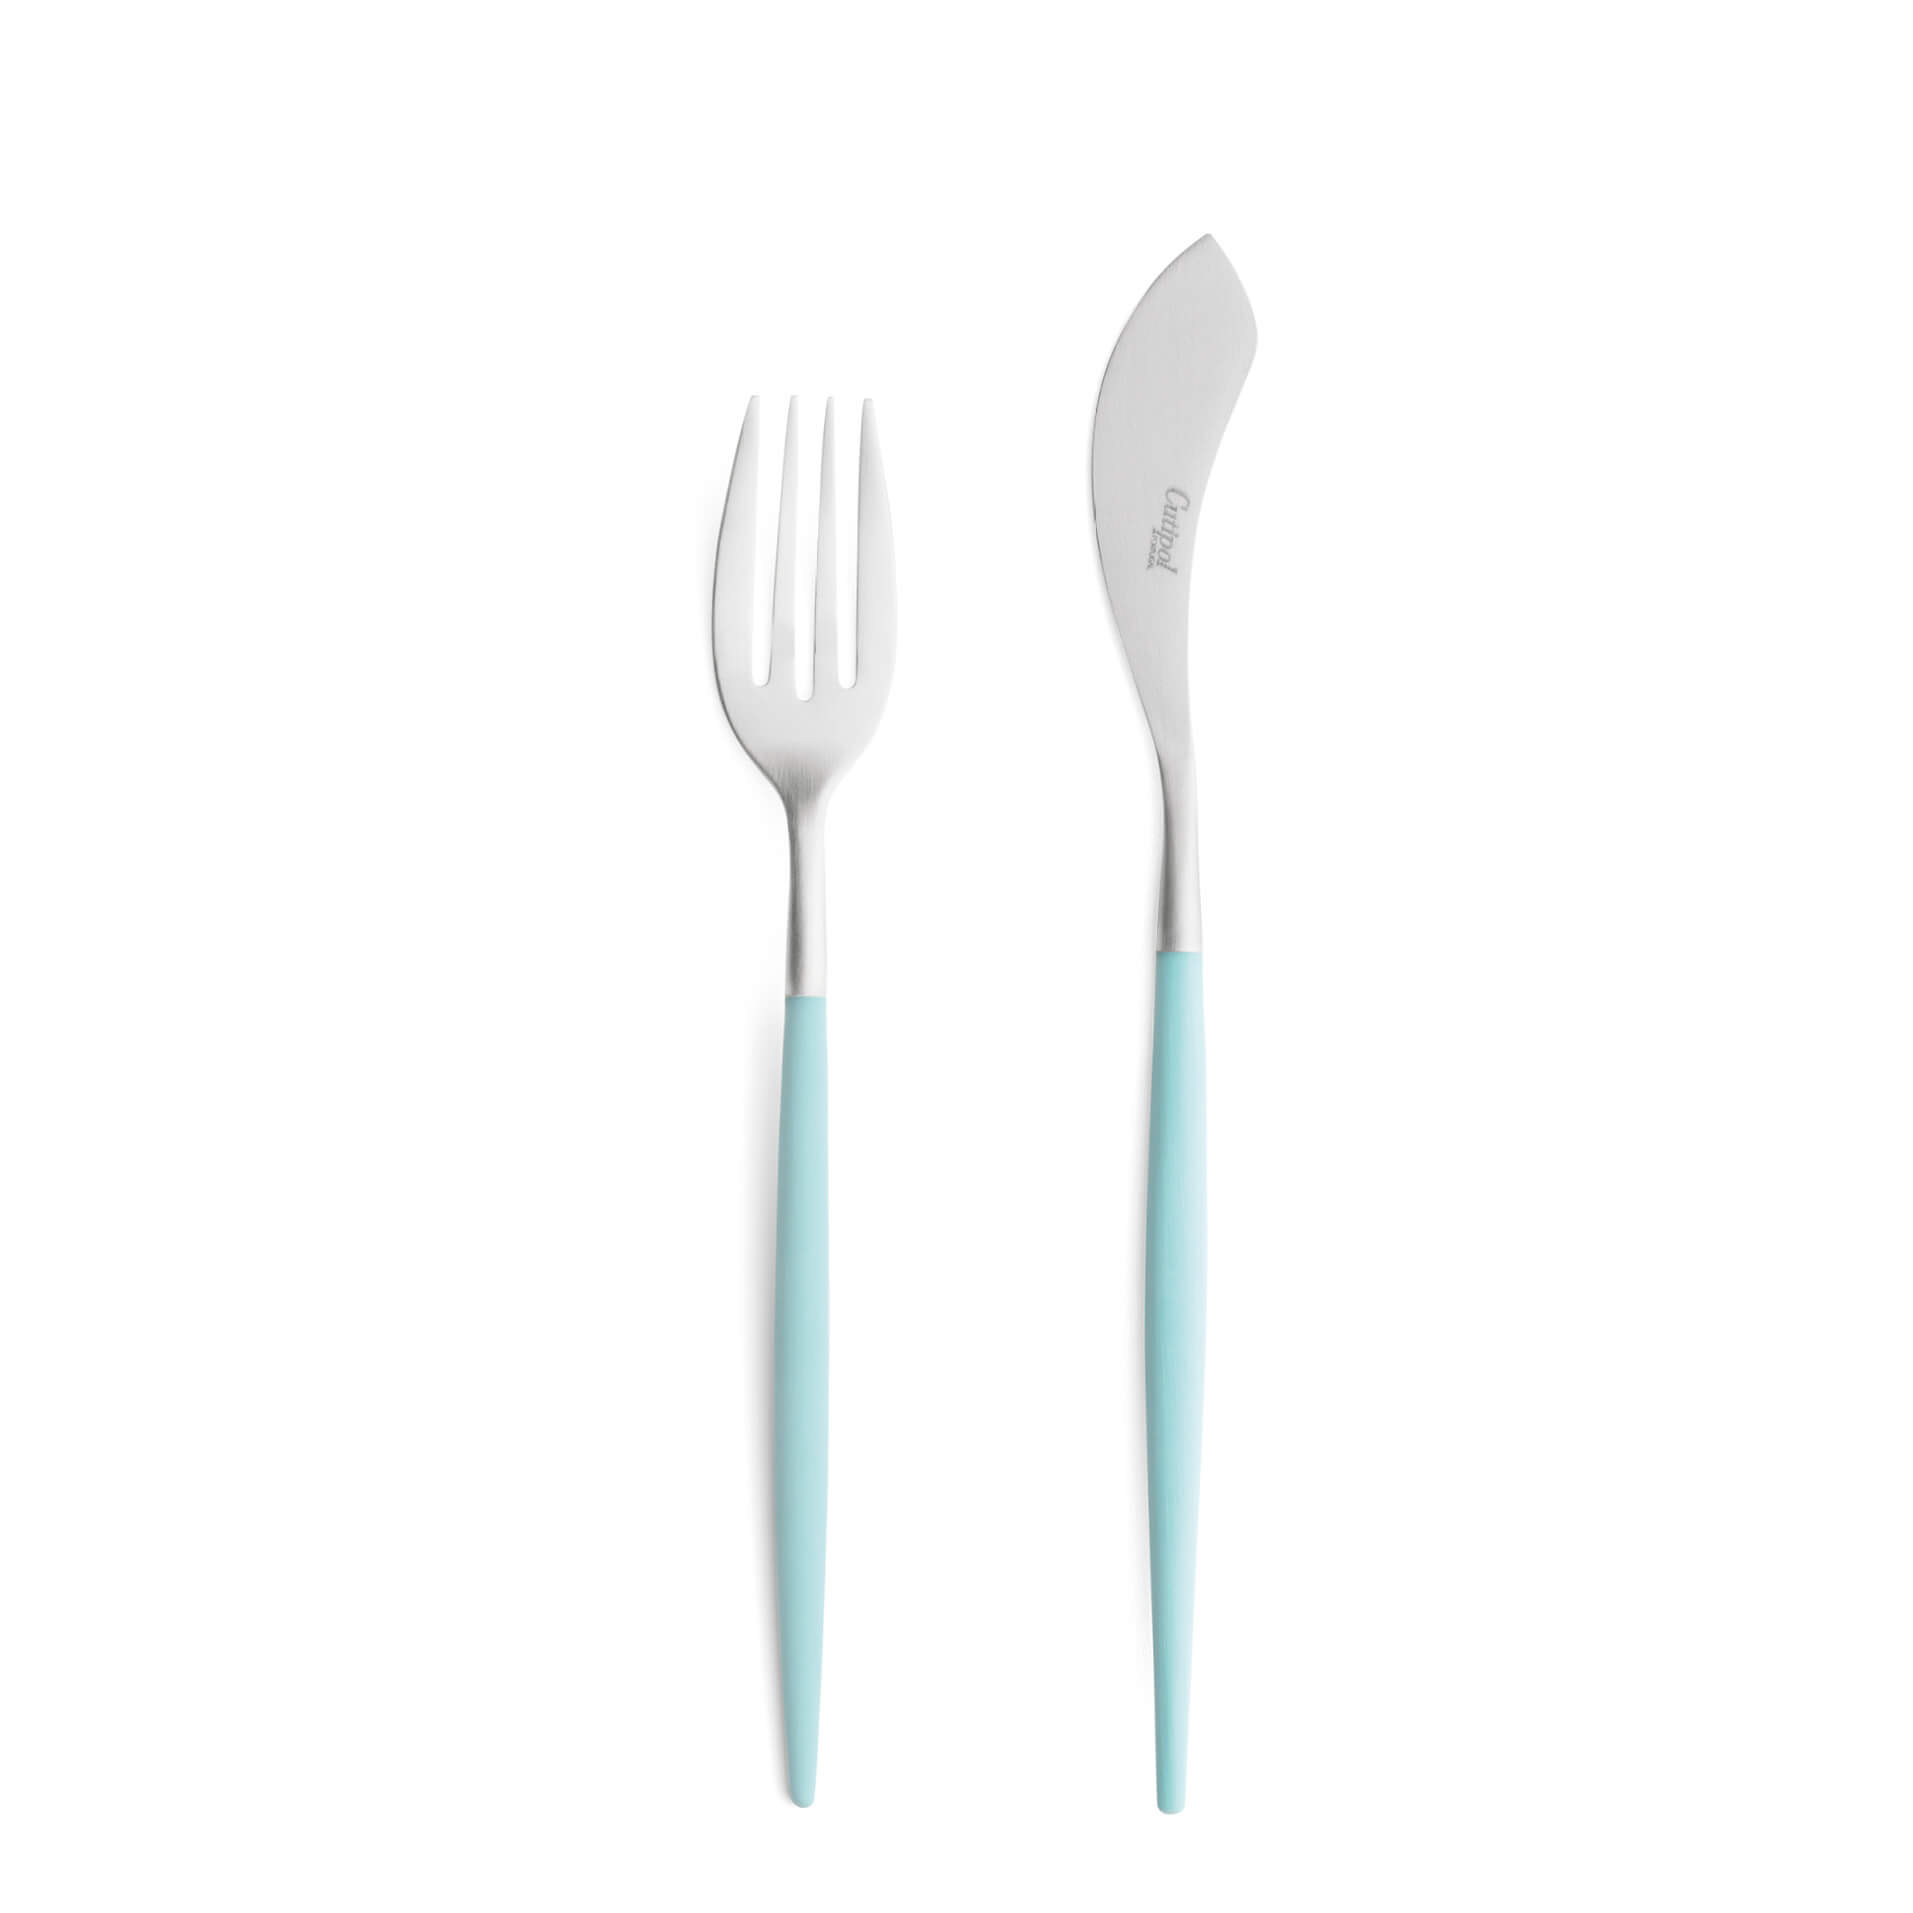 Cutipol Cutlery Mio Turquoise with fish fork and fish knife